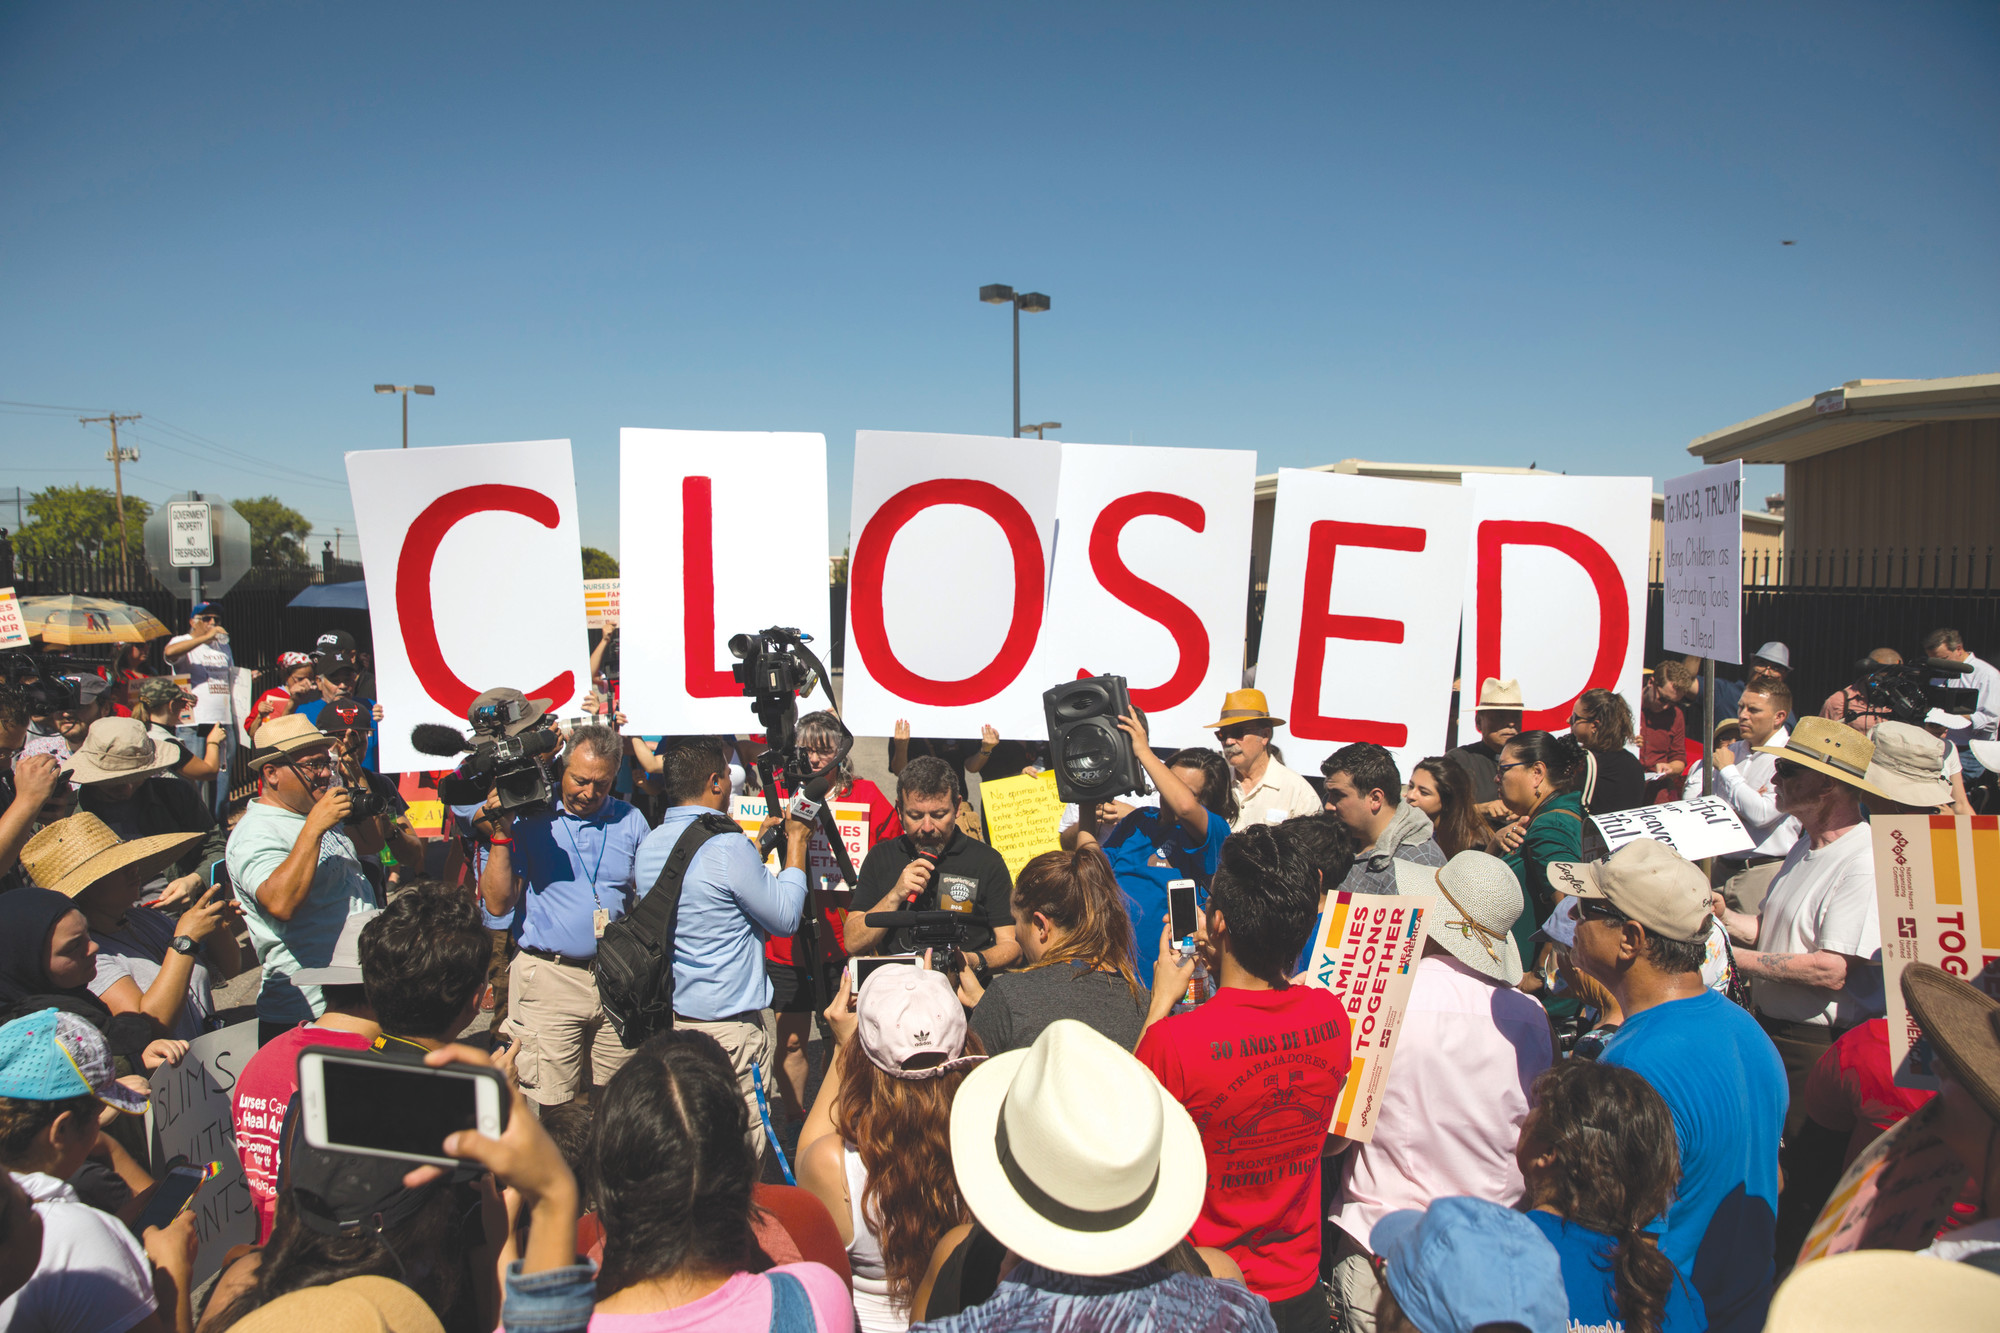 Protesters stand outside the U.S. Immigration and Customs Enforcement processing center in El Paso, Texas, on Tuesday. President Donald Trump on Wednesday signed an executive order to stop separation of families crossing the U.S. border. The "zero-tolerance" policy to prosecute adults crossing the border illegally is still in effect.